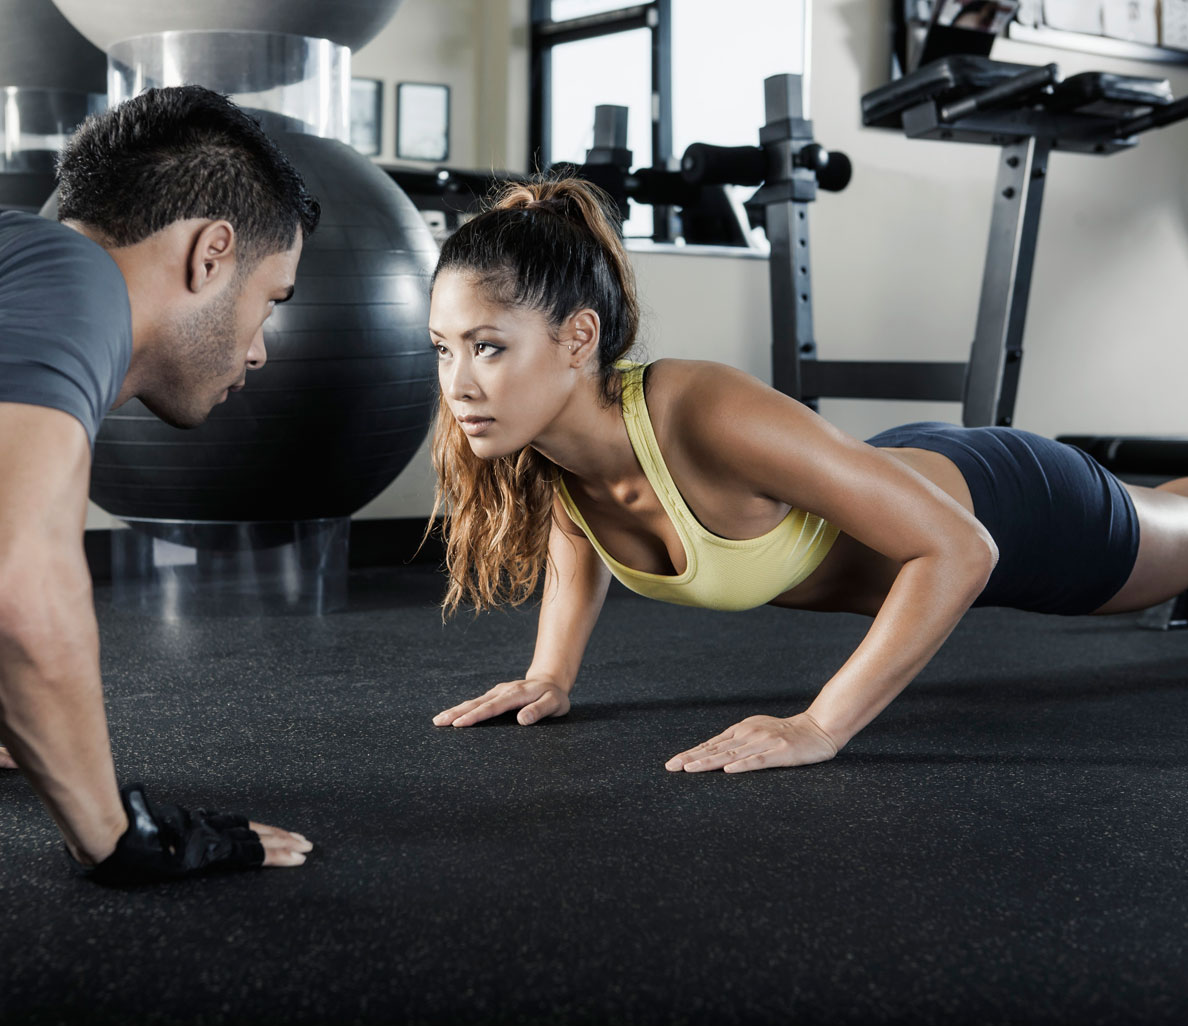 How to pick up women at the gym, according to women